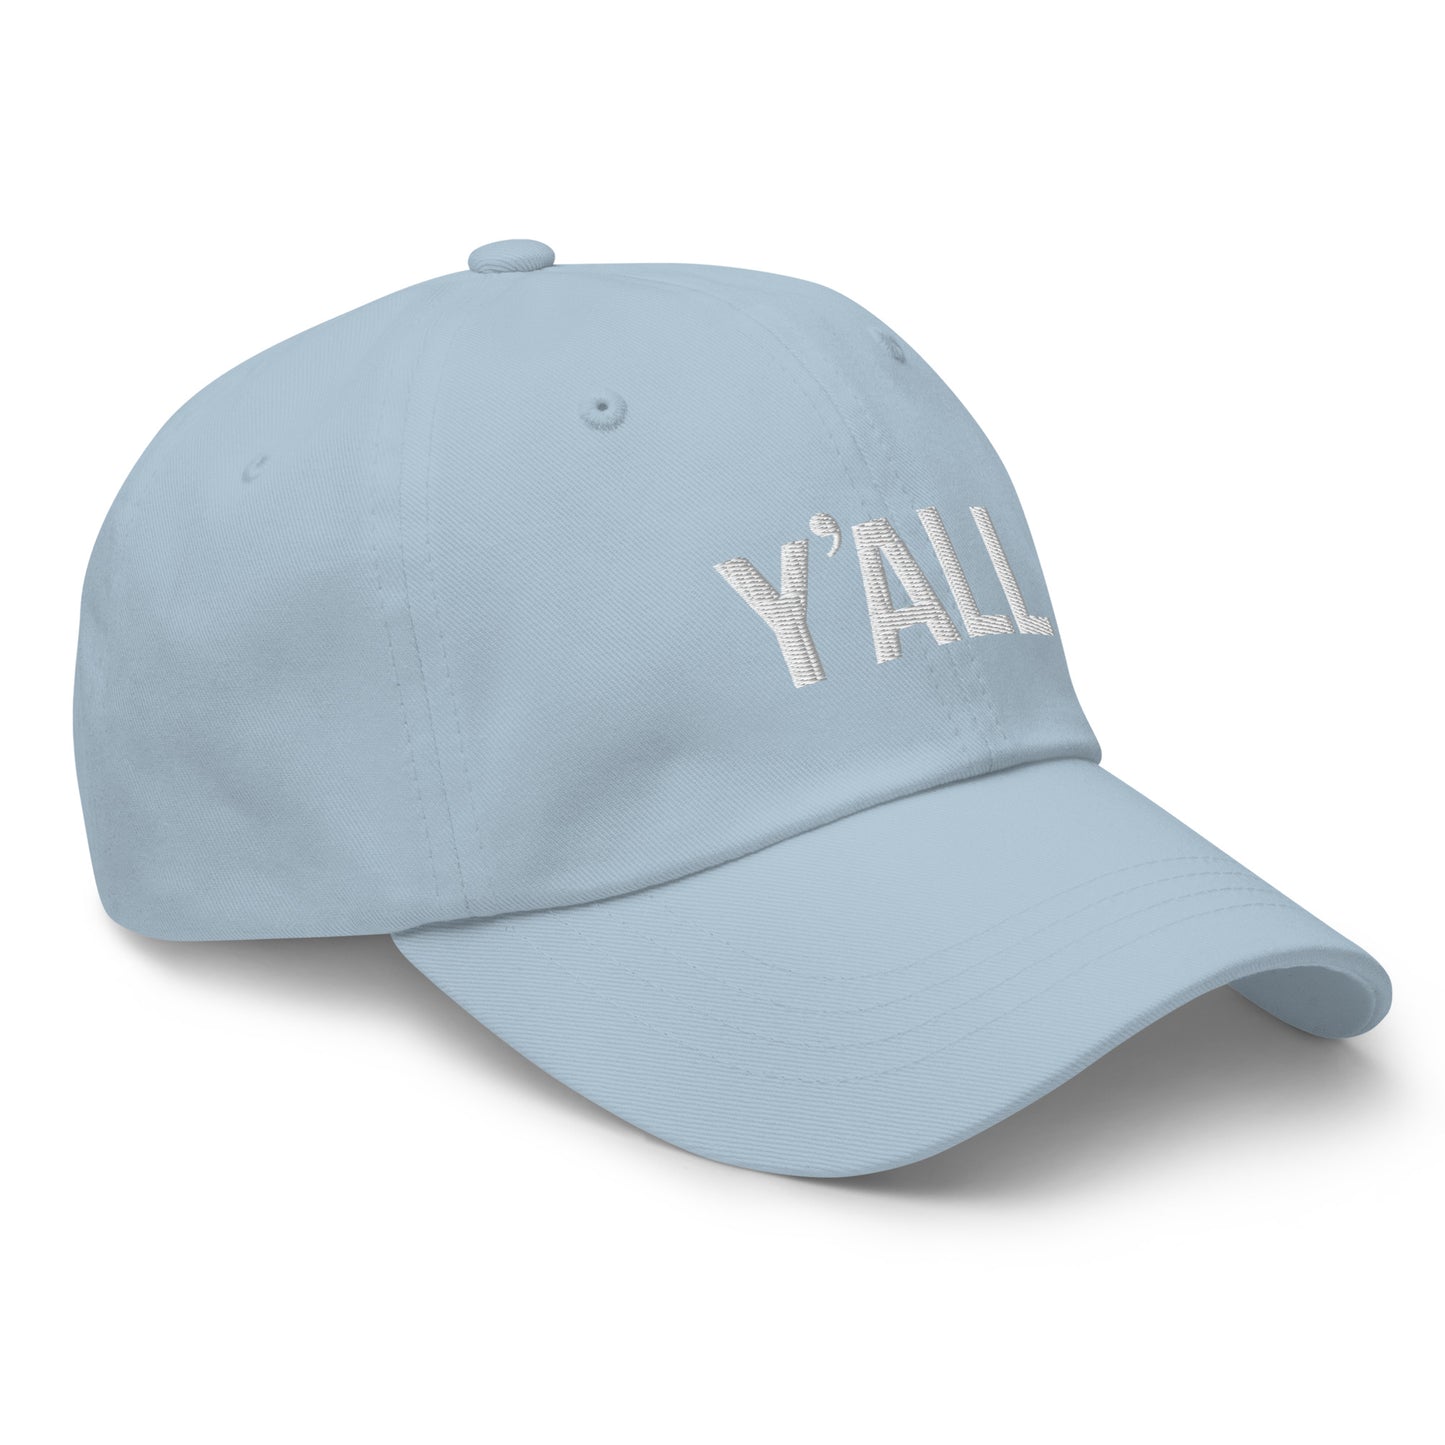 Y'all hat